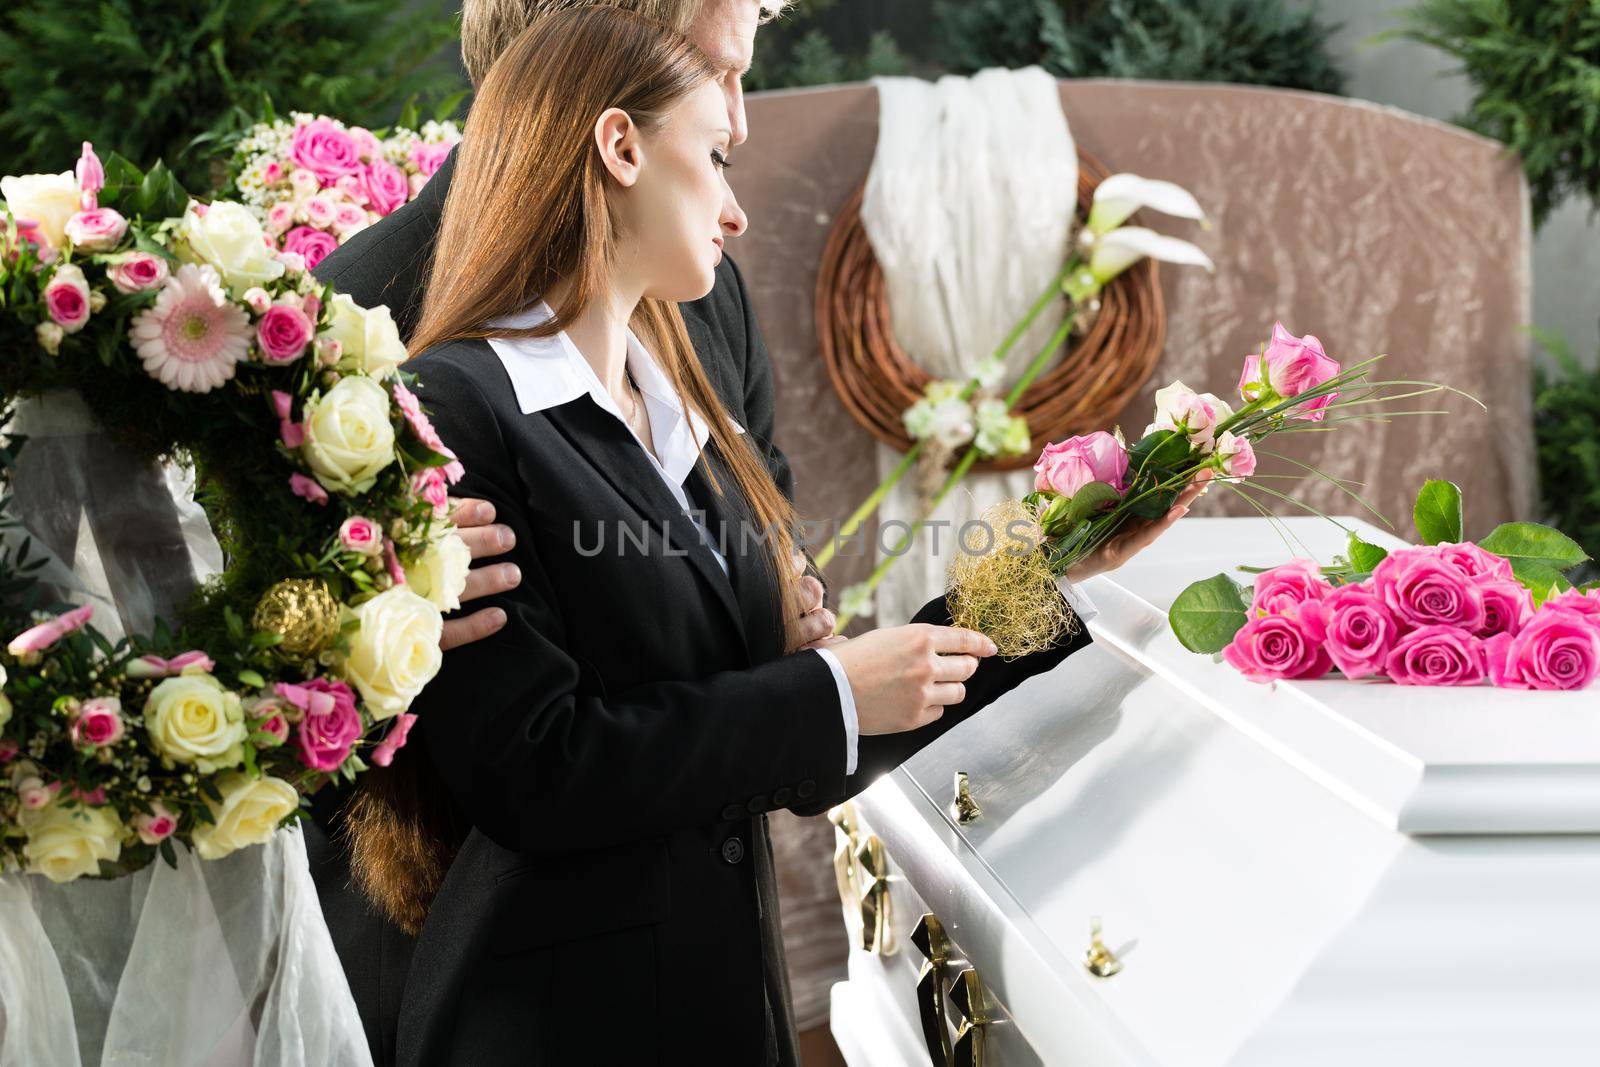 Mourning People at Funeral with coffin by Kzenon